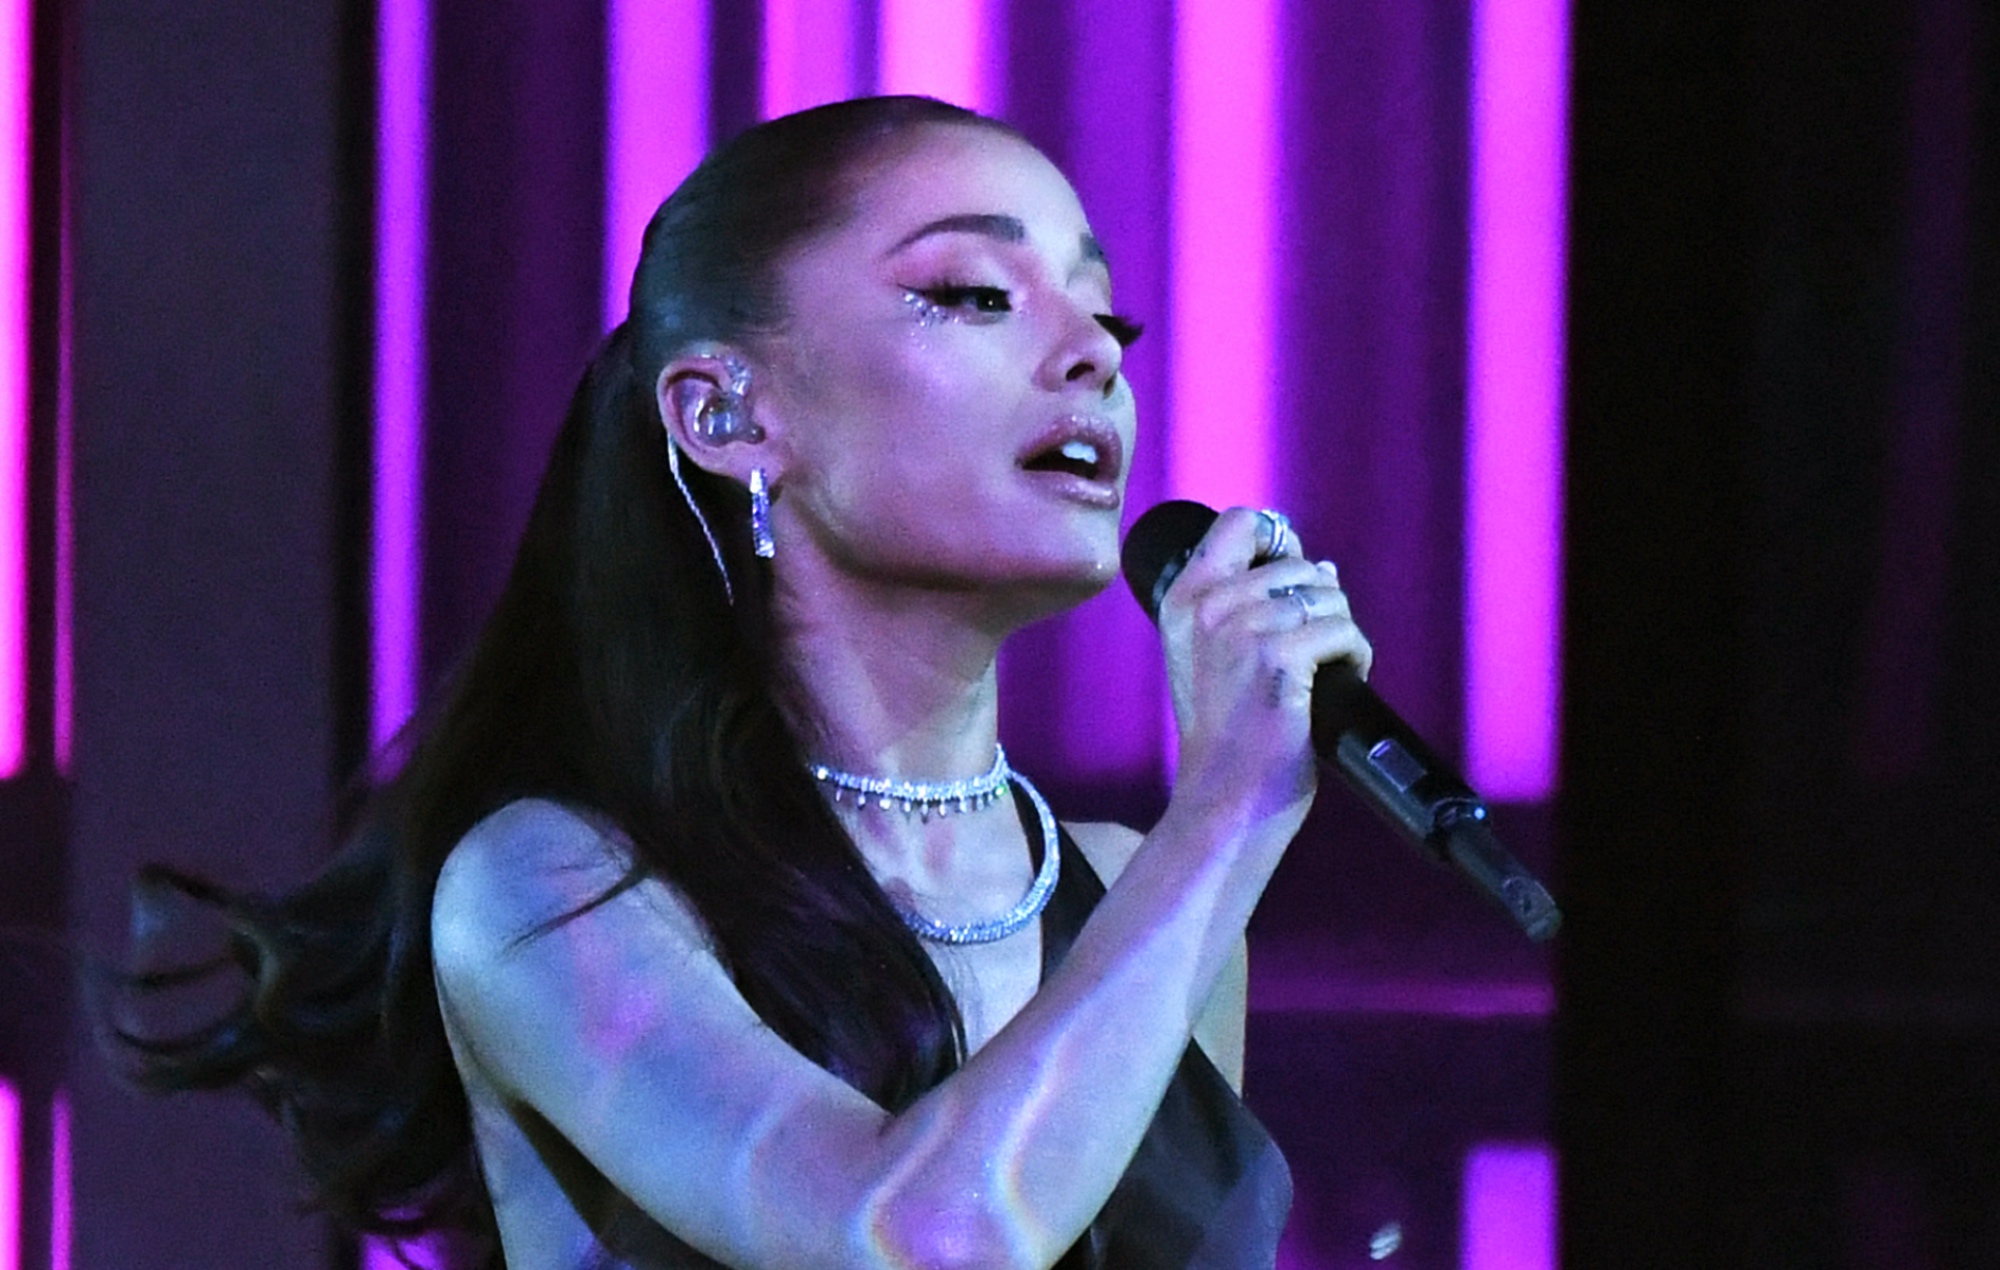 Ariana Grande performing live on stage